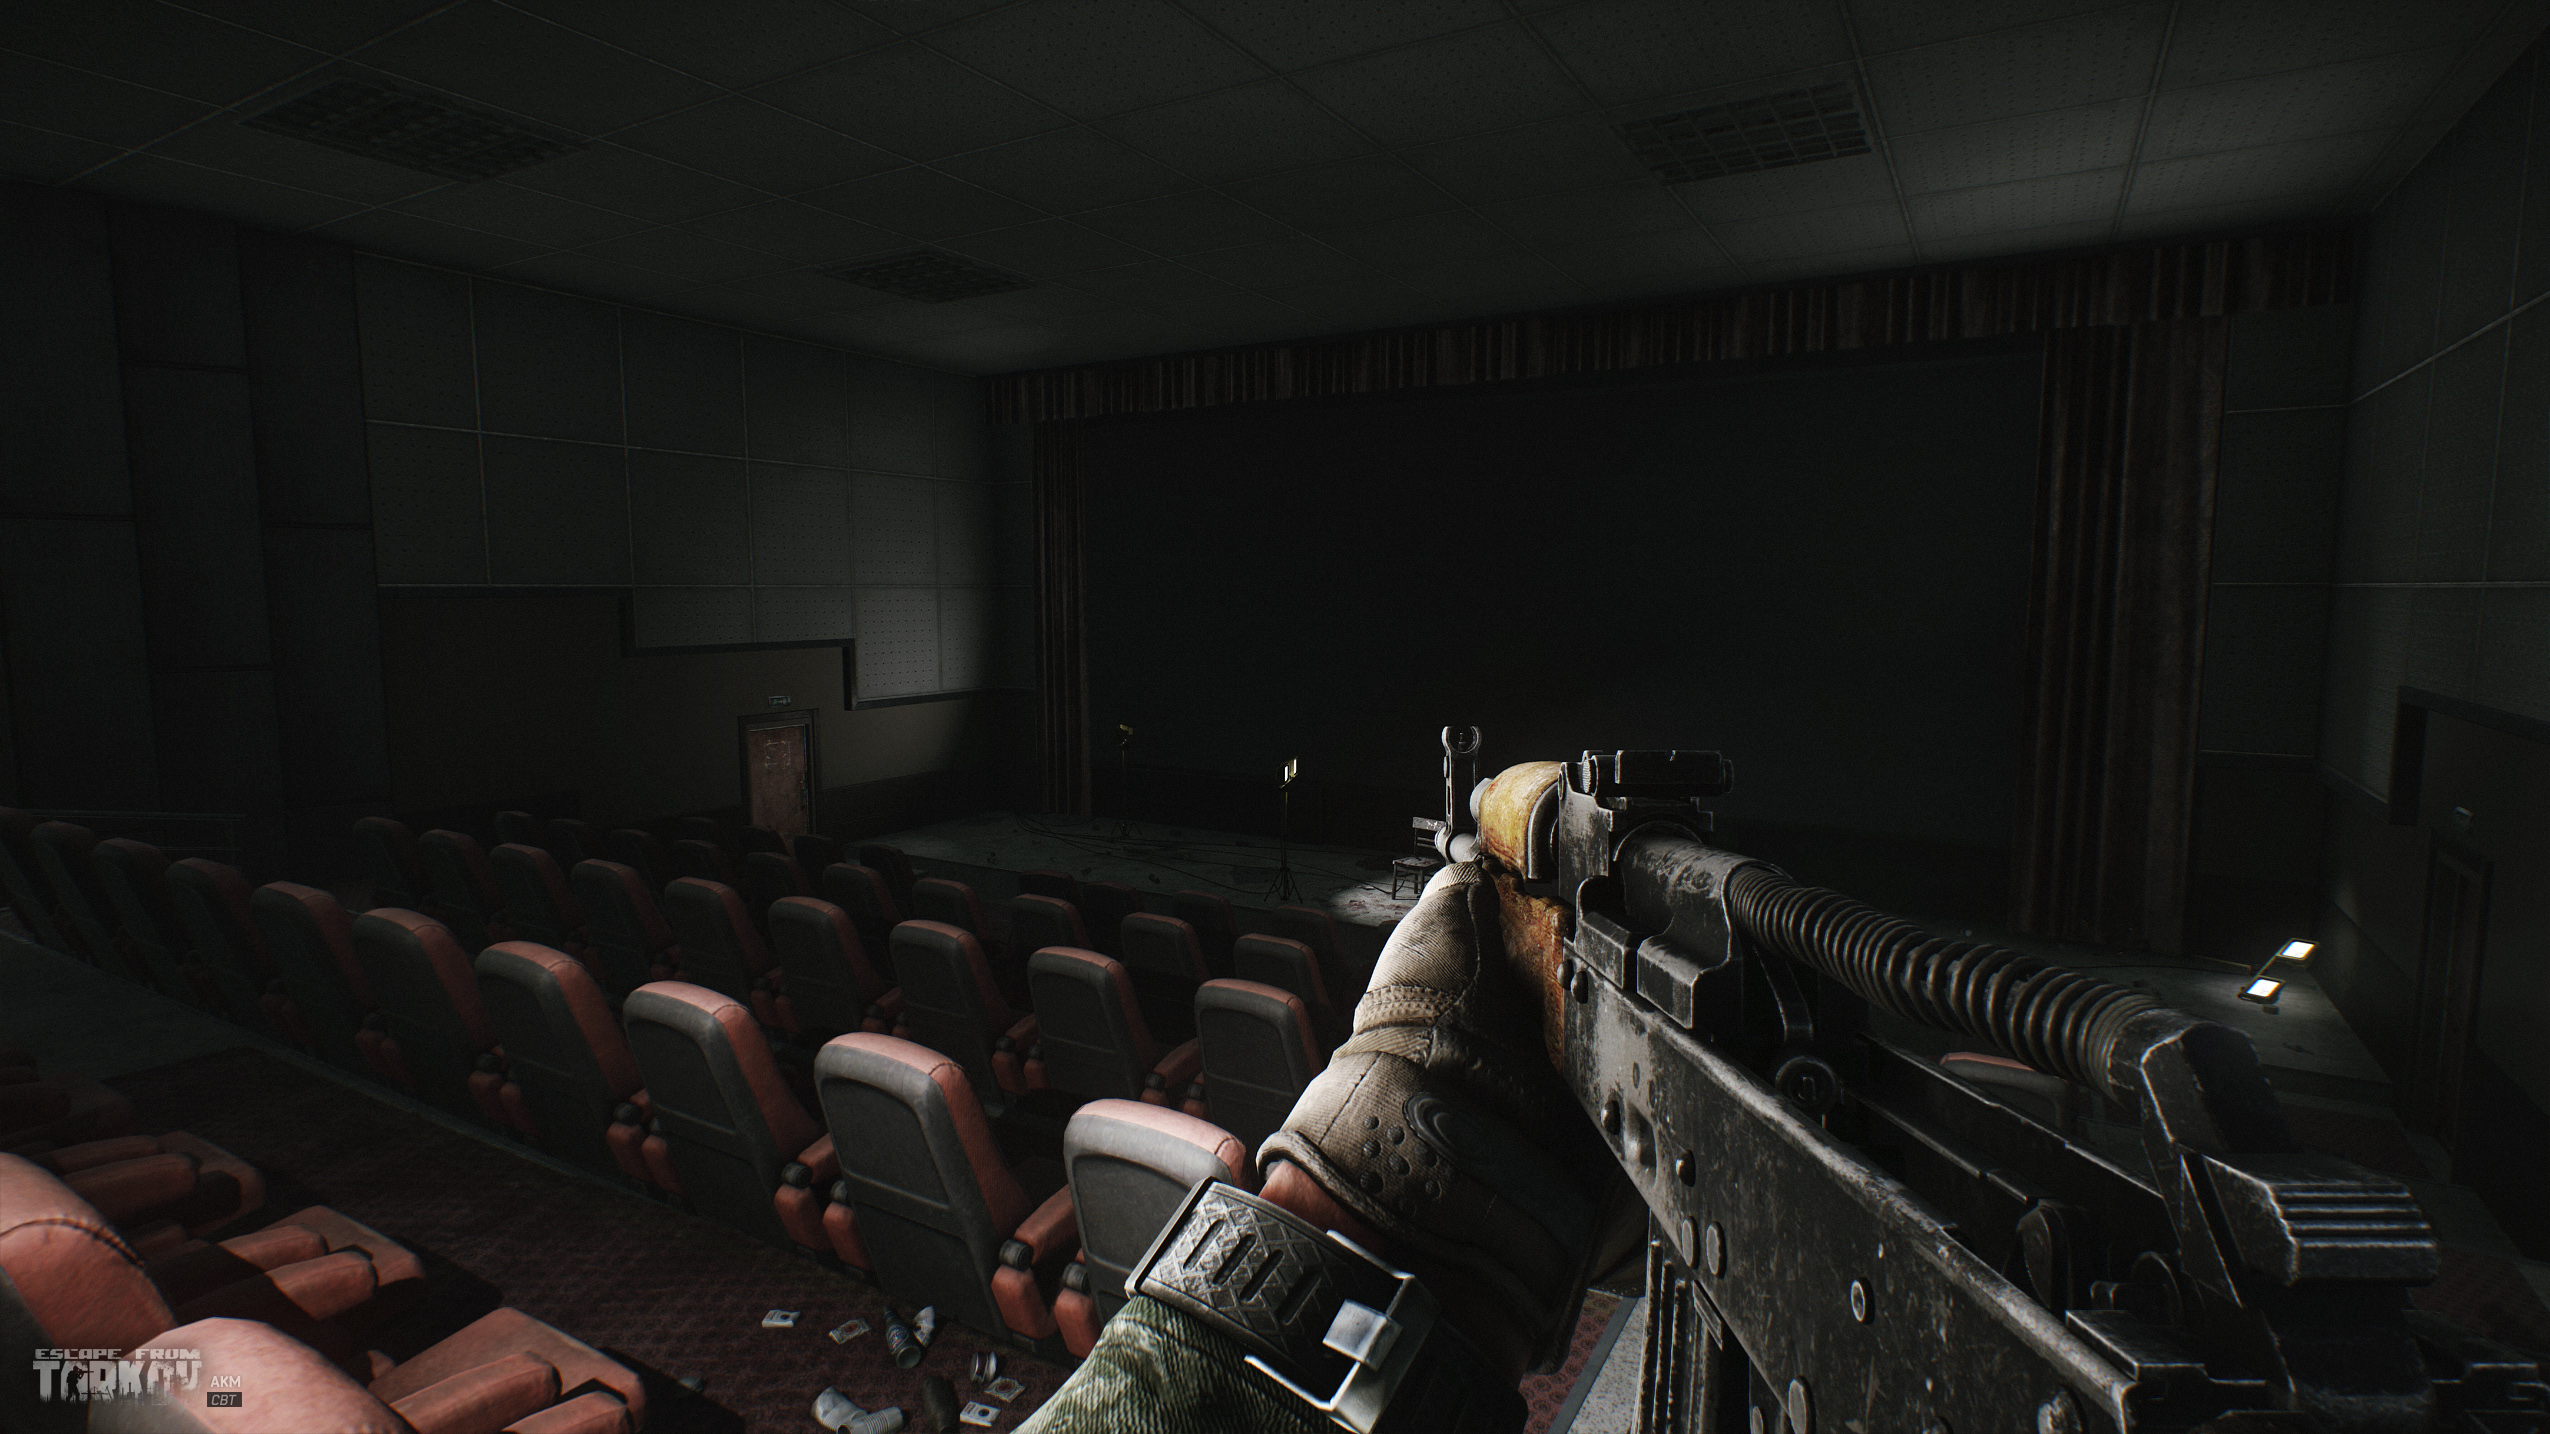 Escape from Tarkov We present to your attention the screenshots of the latest addition to our weapon range - 7.62mm AKM - 2